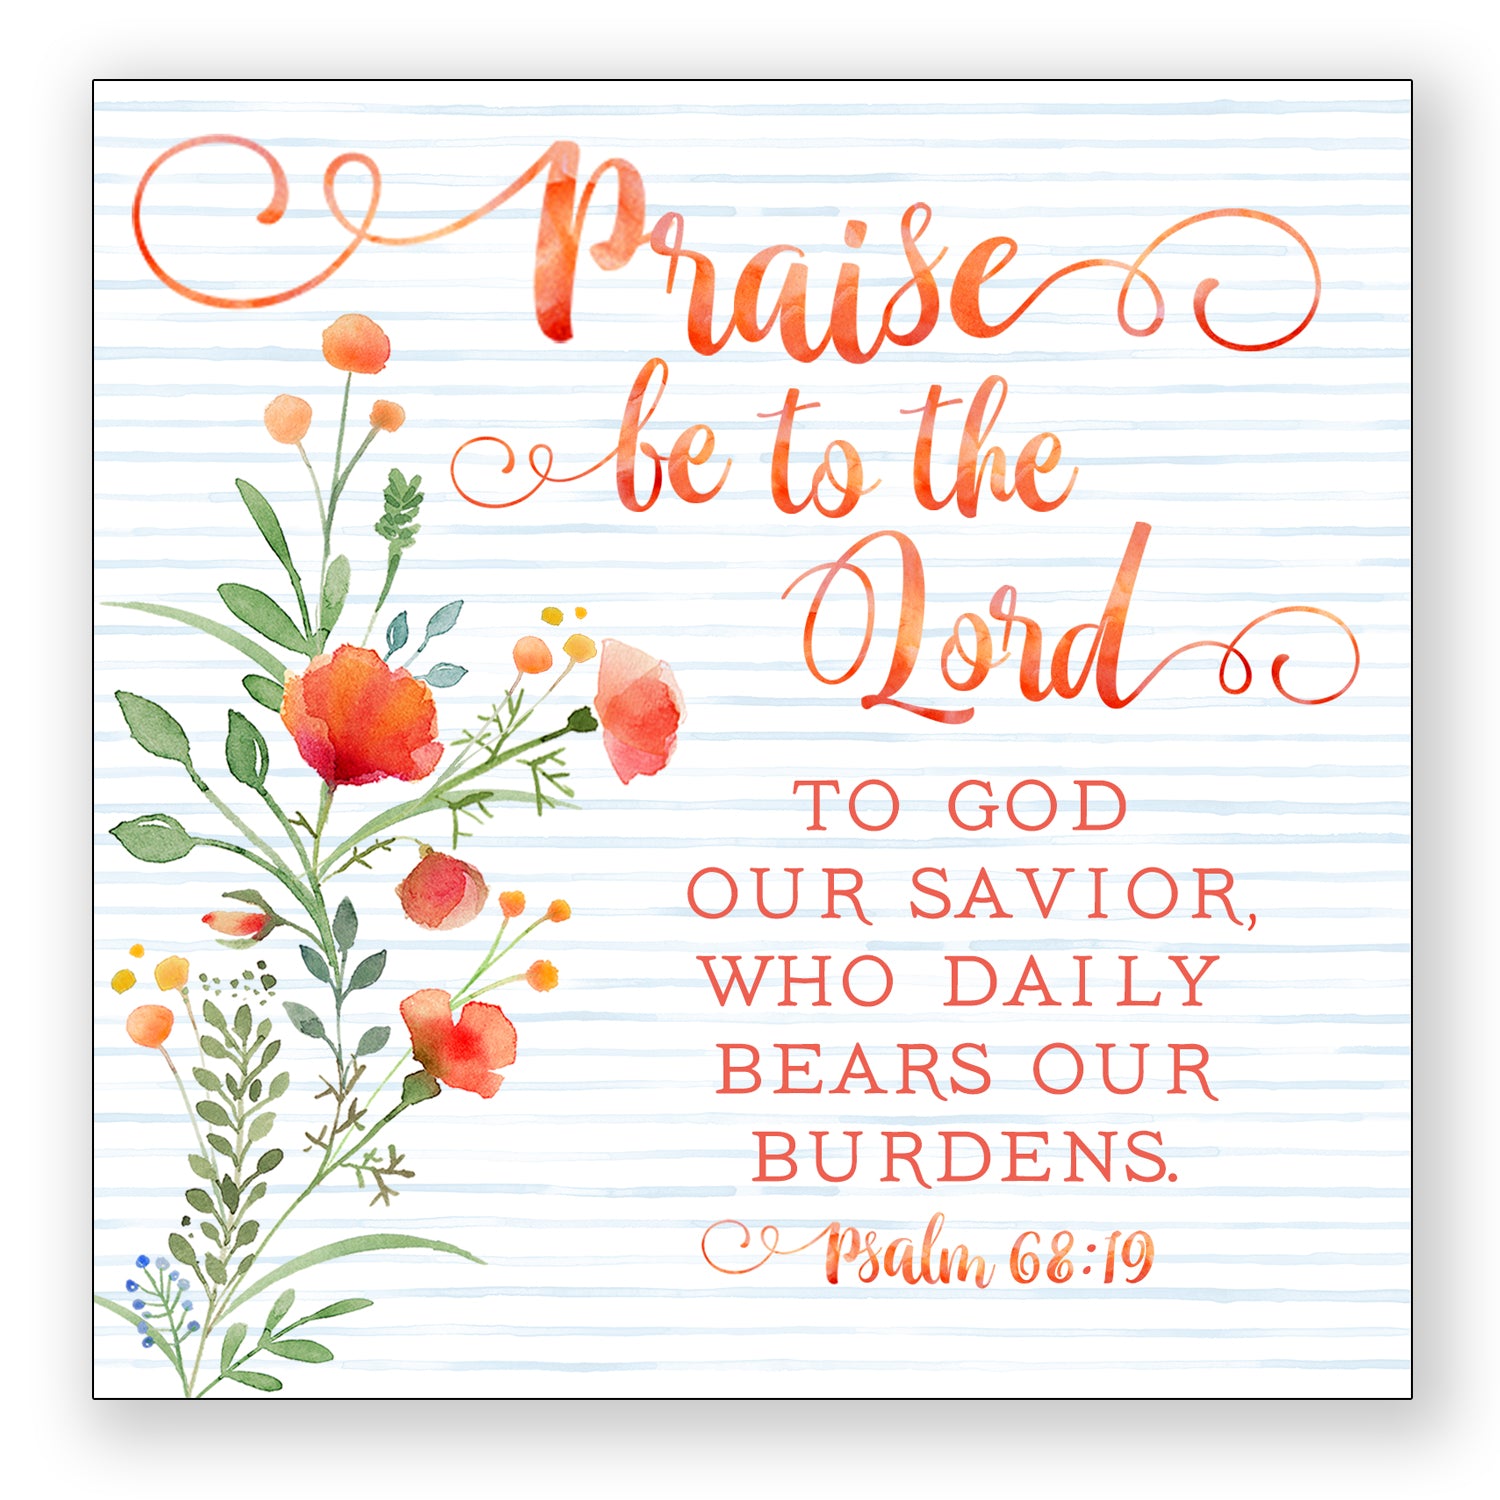 Praise Be To The Lord (Psalm 68:19) - Mini Print